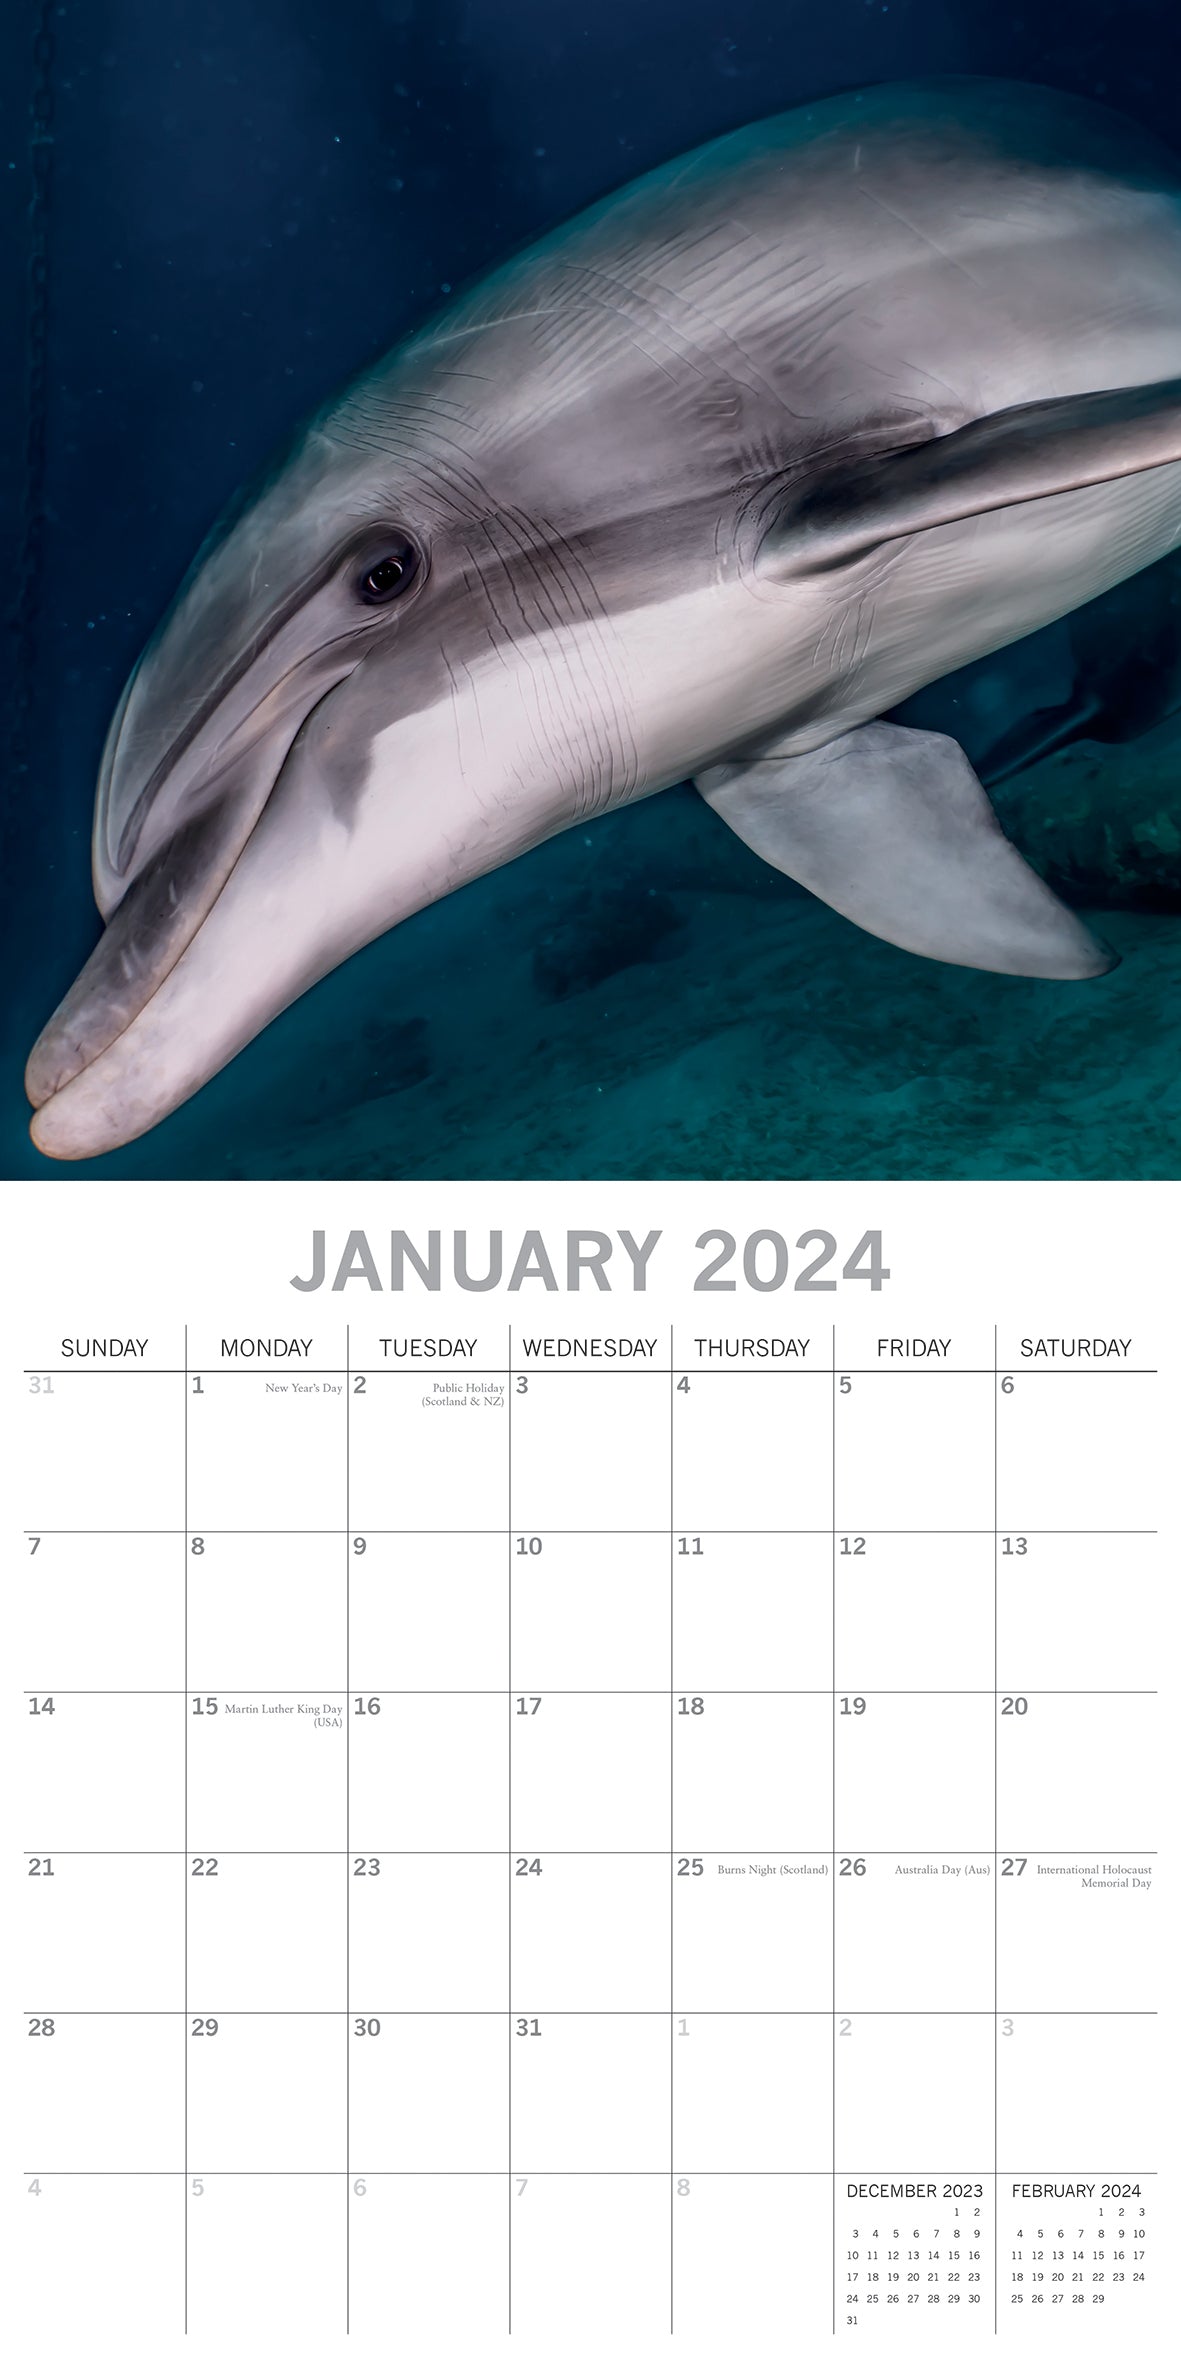 Dolphins - 2024 Square Wall Calendar Sea Animals 16 Months Premium Planner Gift